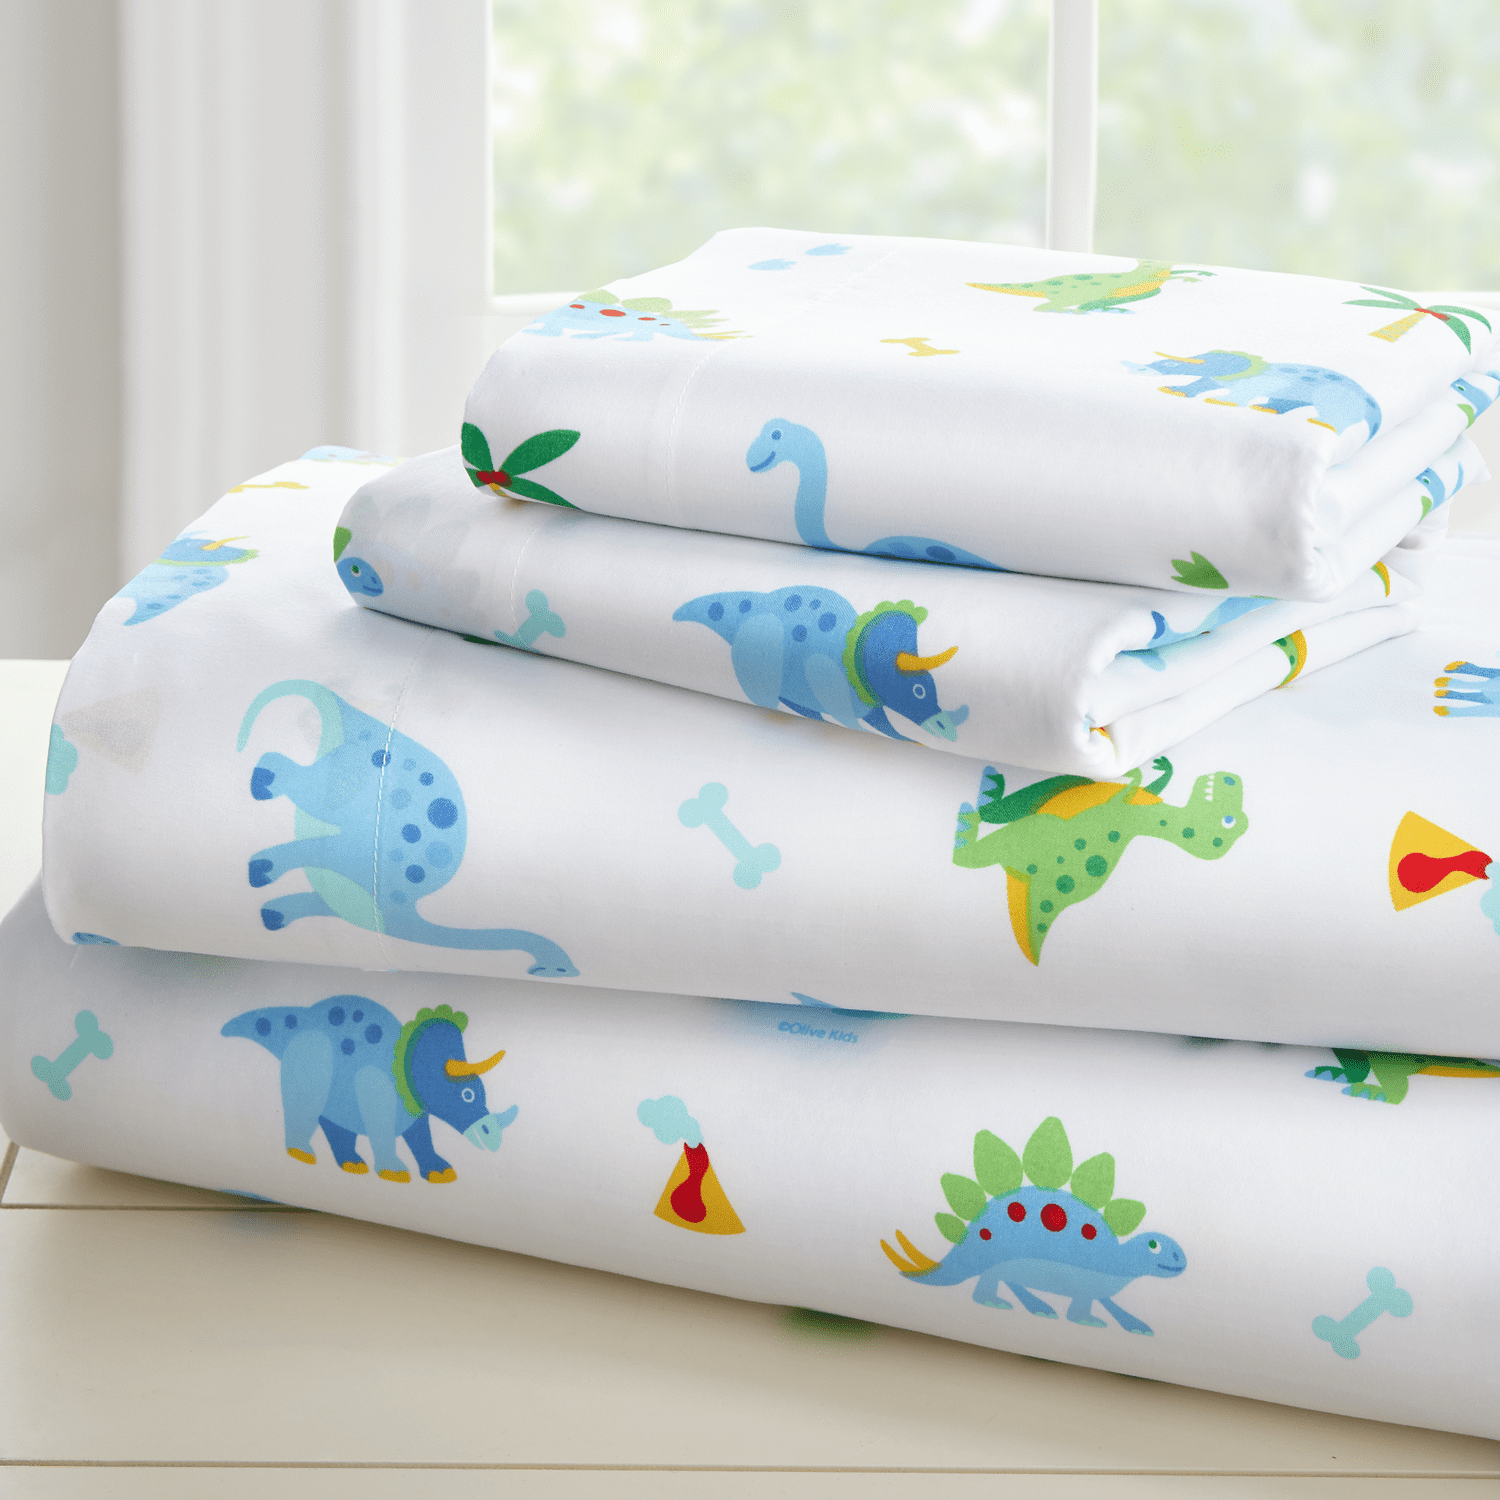 Olive Kids Toddler Boys and Girls BPA-free Wildkin Microfiber Fitted Crib Sheet For Infant Fits Standard Crib Mattress Dinosaur Land Includes One Fitted Crib Sheet Measures 52 x 28 Inches